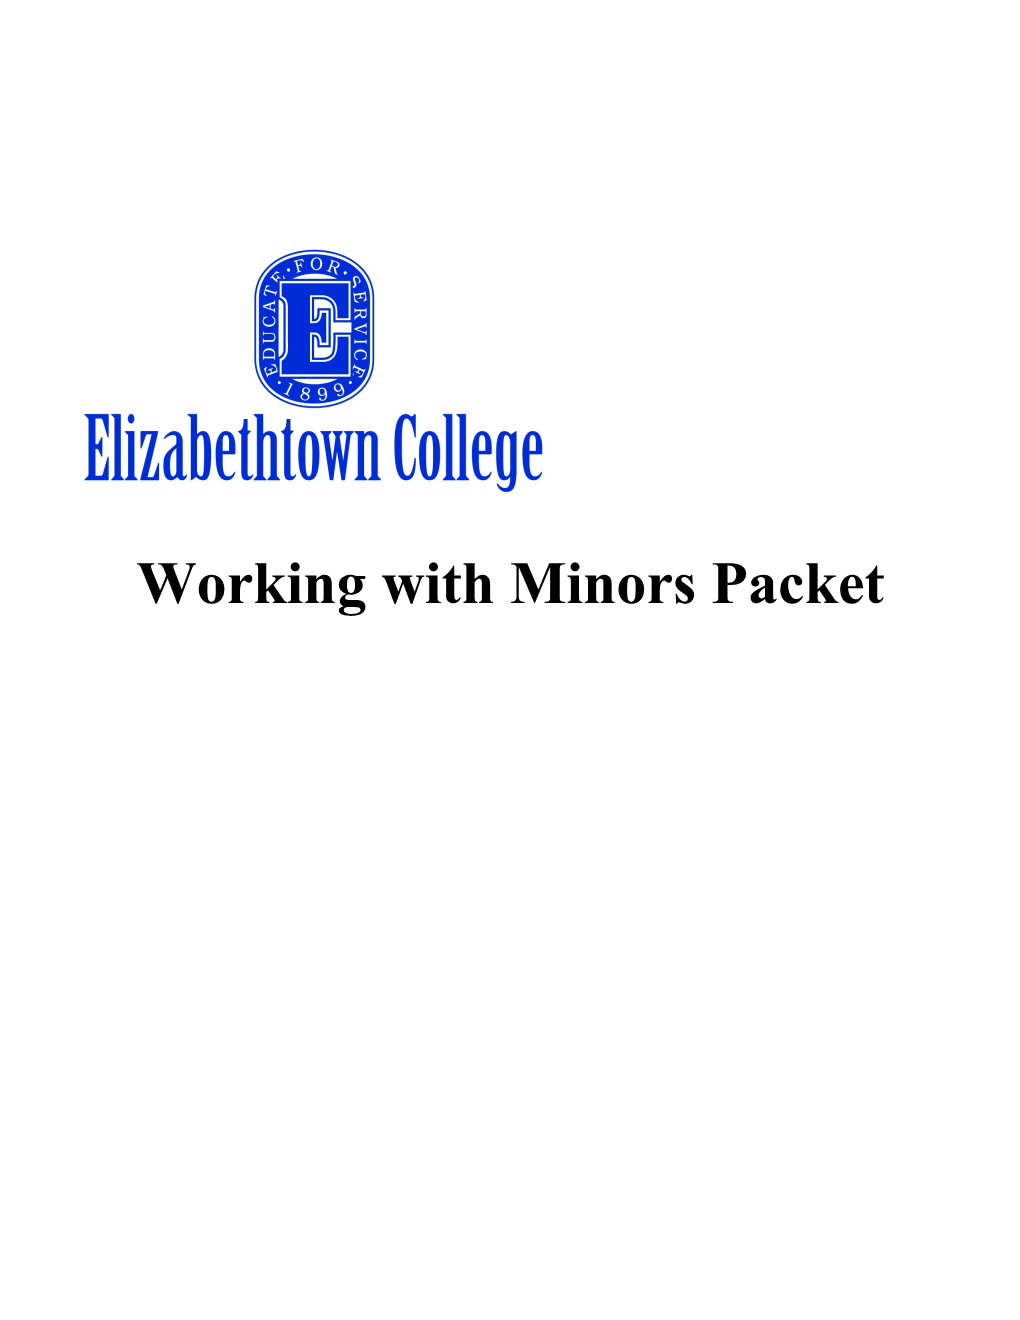 Working with Minors Packet